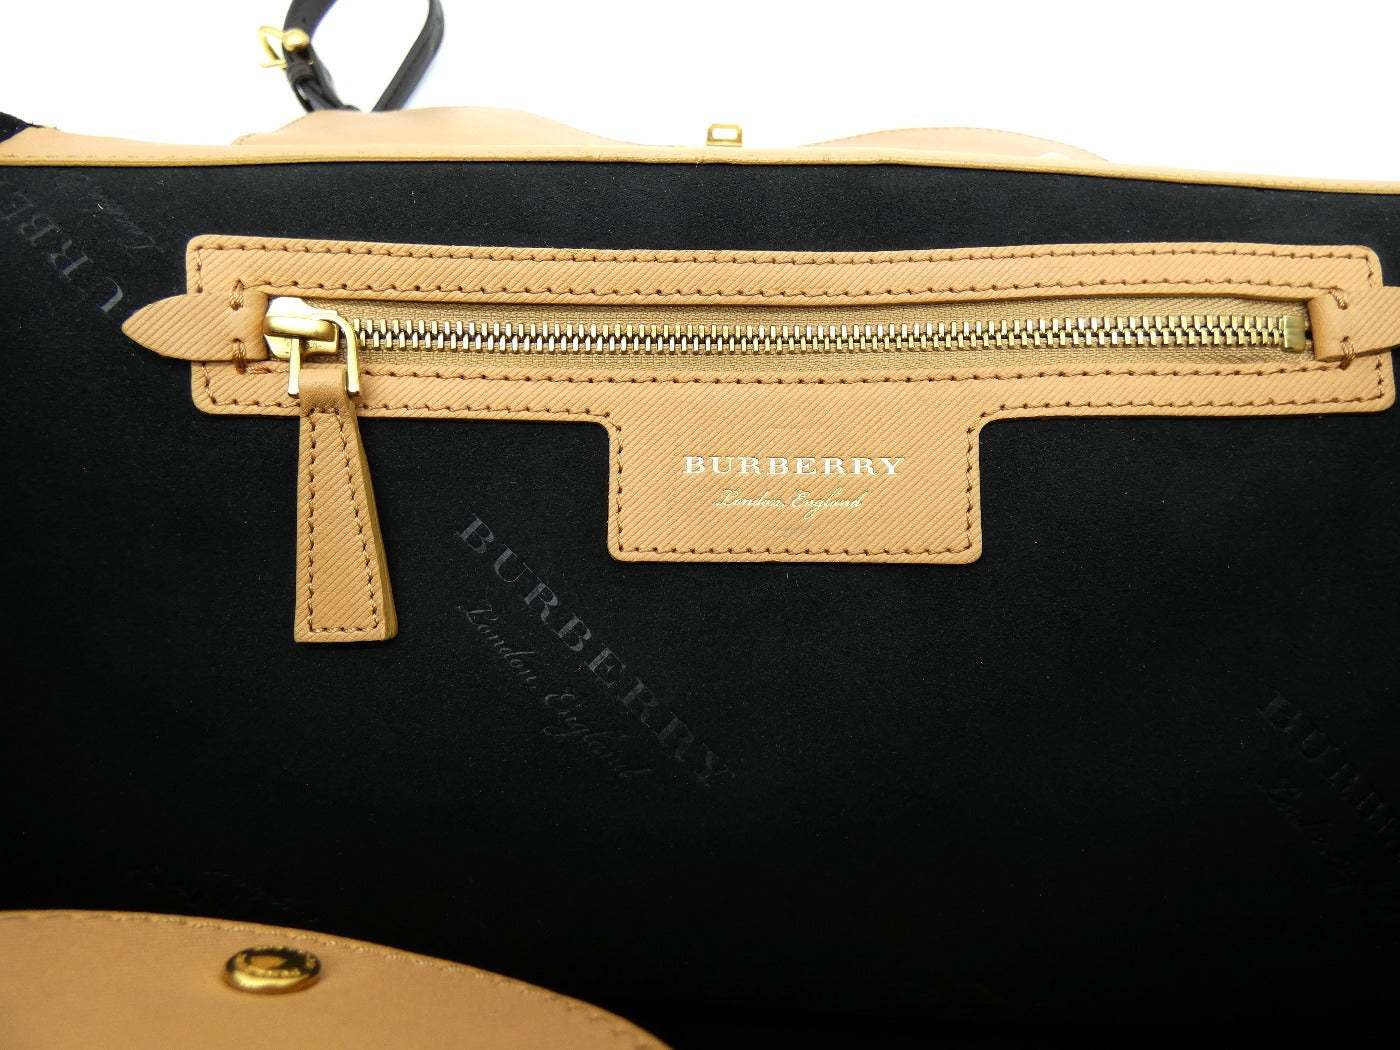 Burberry Large DK88 Calfskin Pale Clementine Tote Bag Burberry